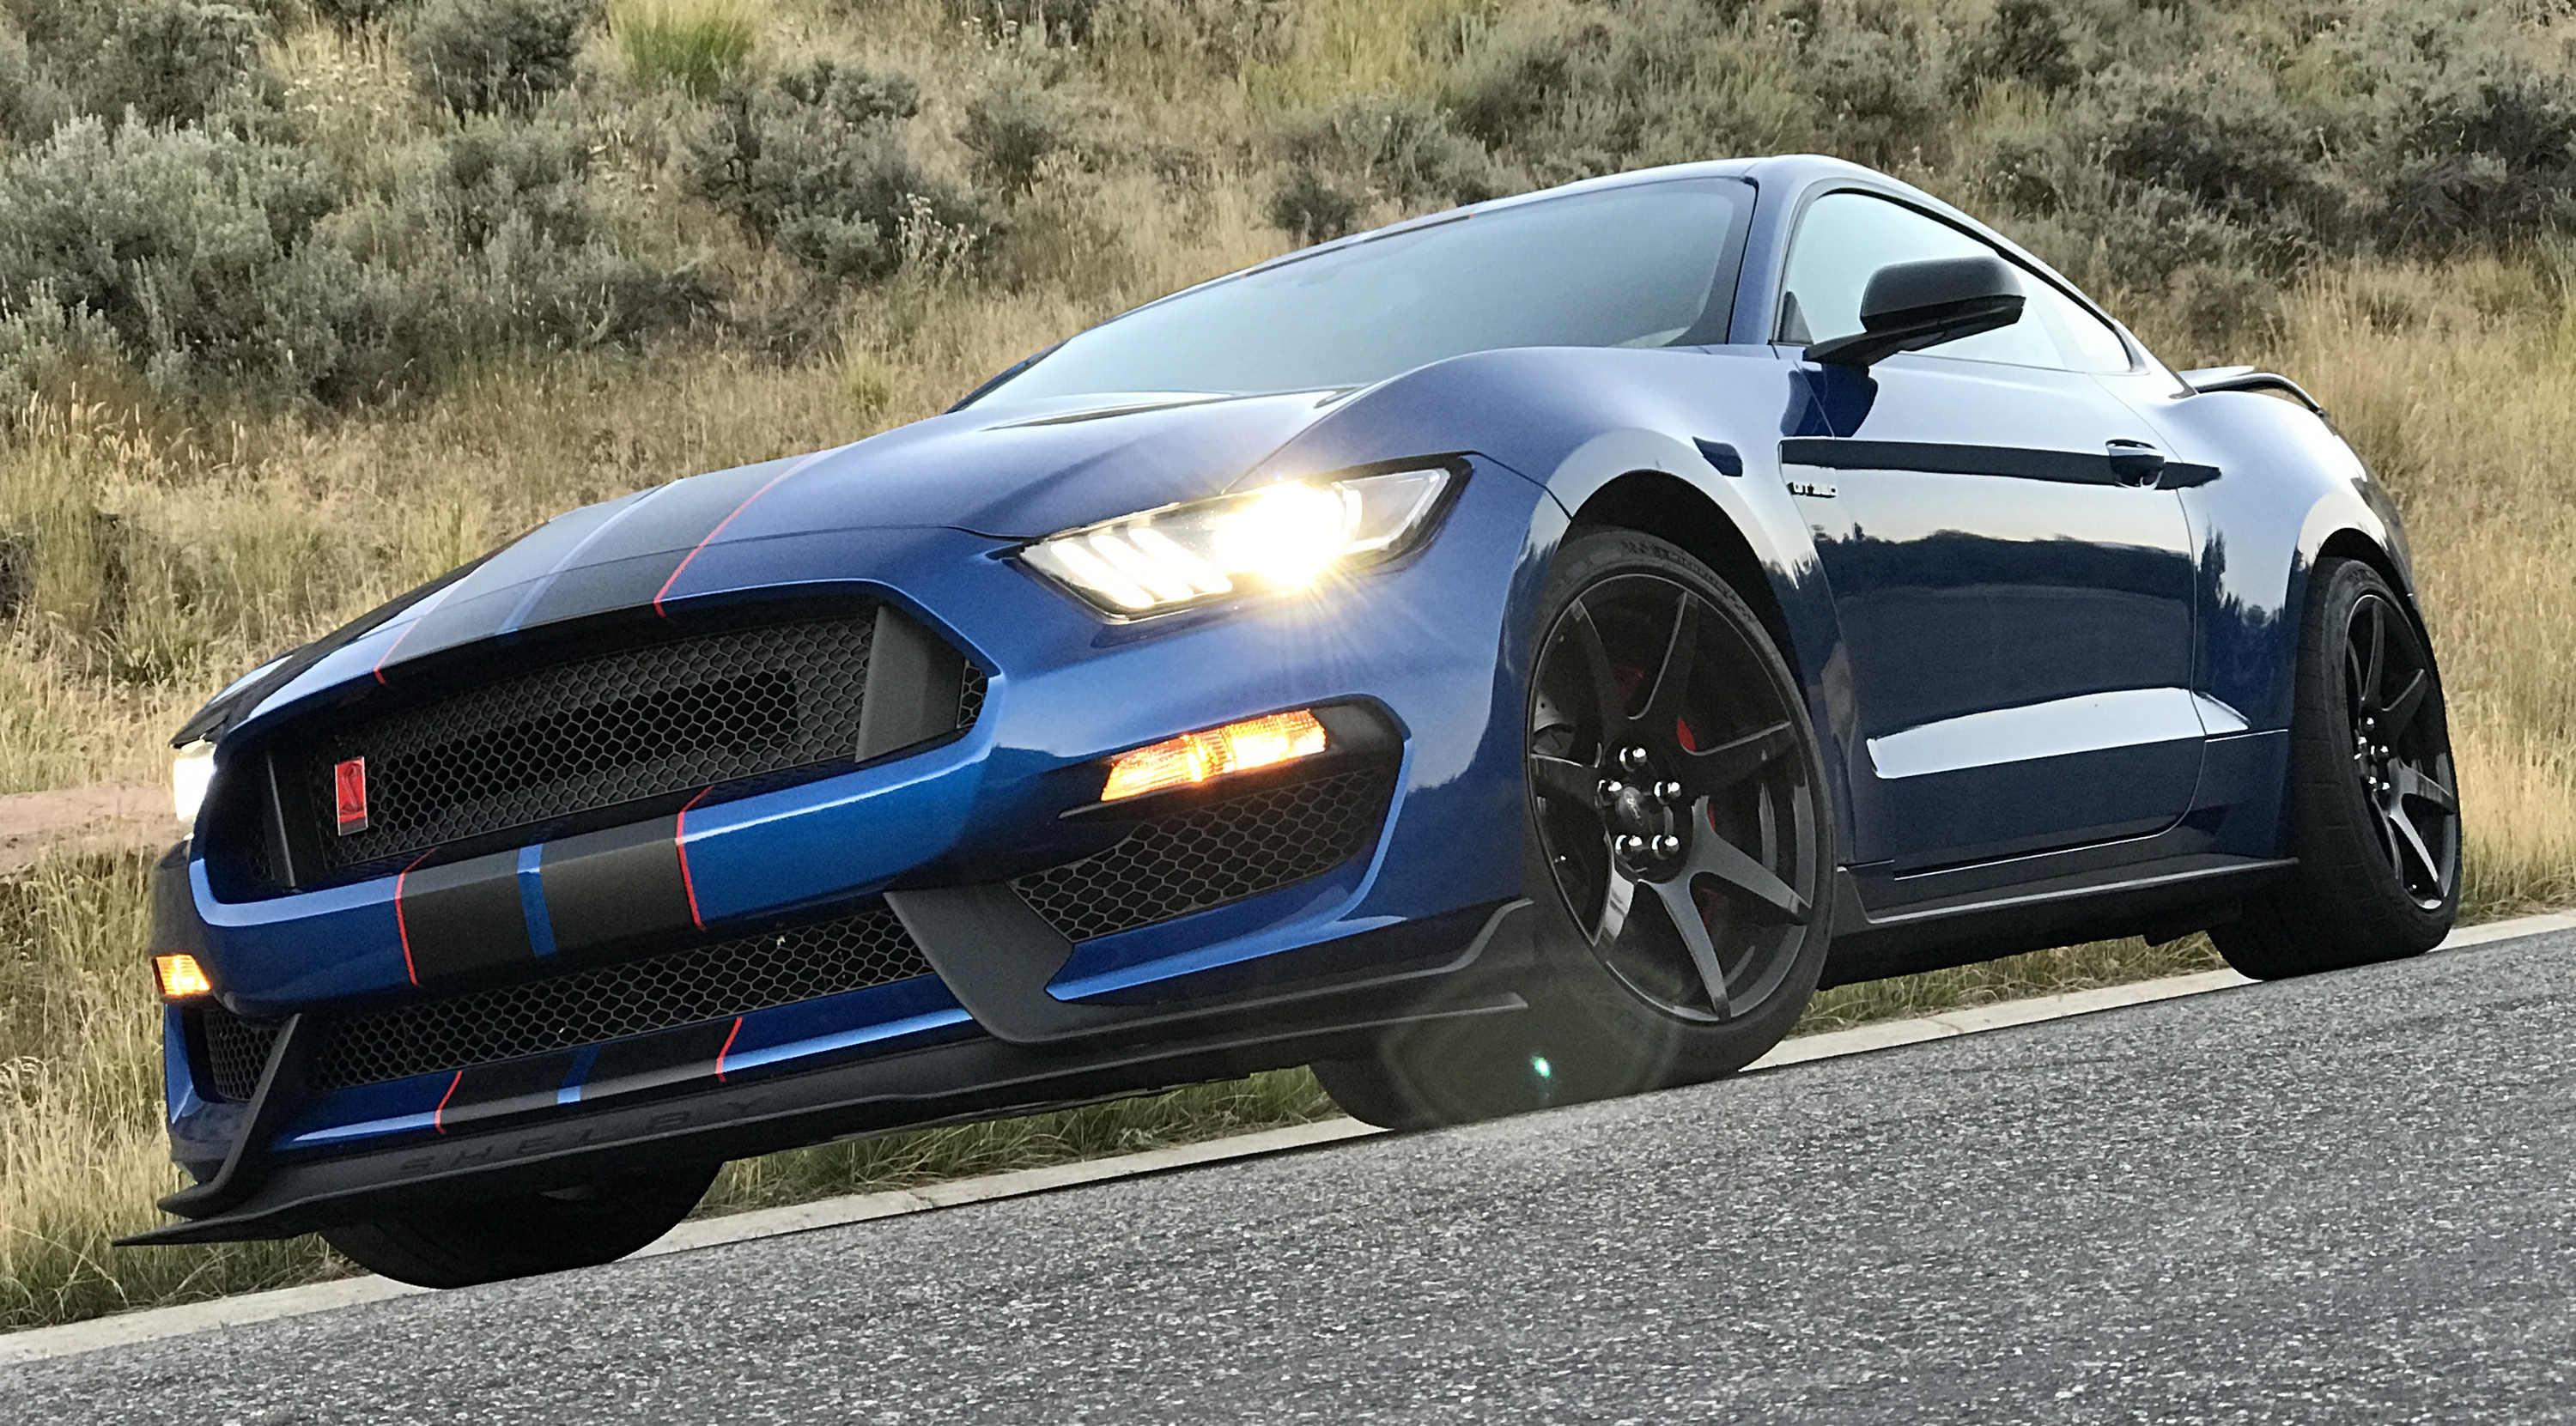 The Mustang Shelby GT350R: Best Track Car Ever? – Karl on Cars